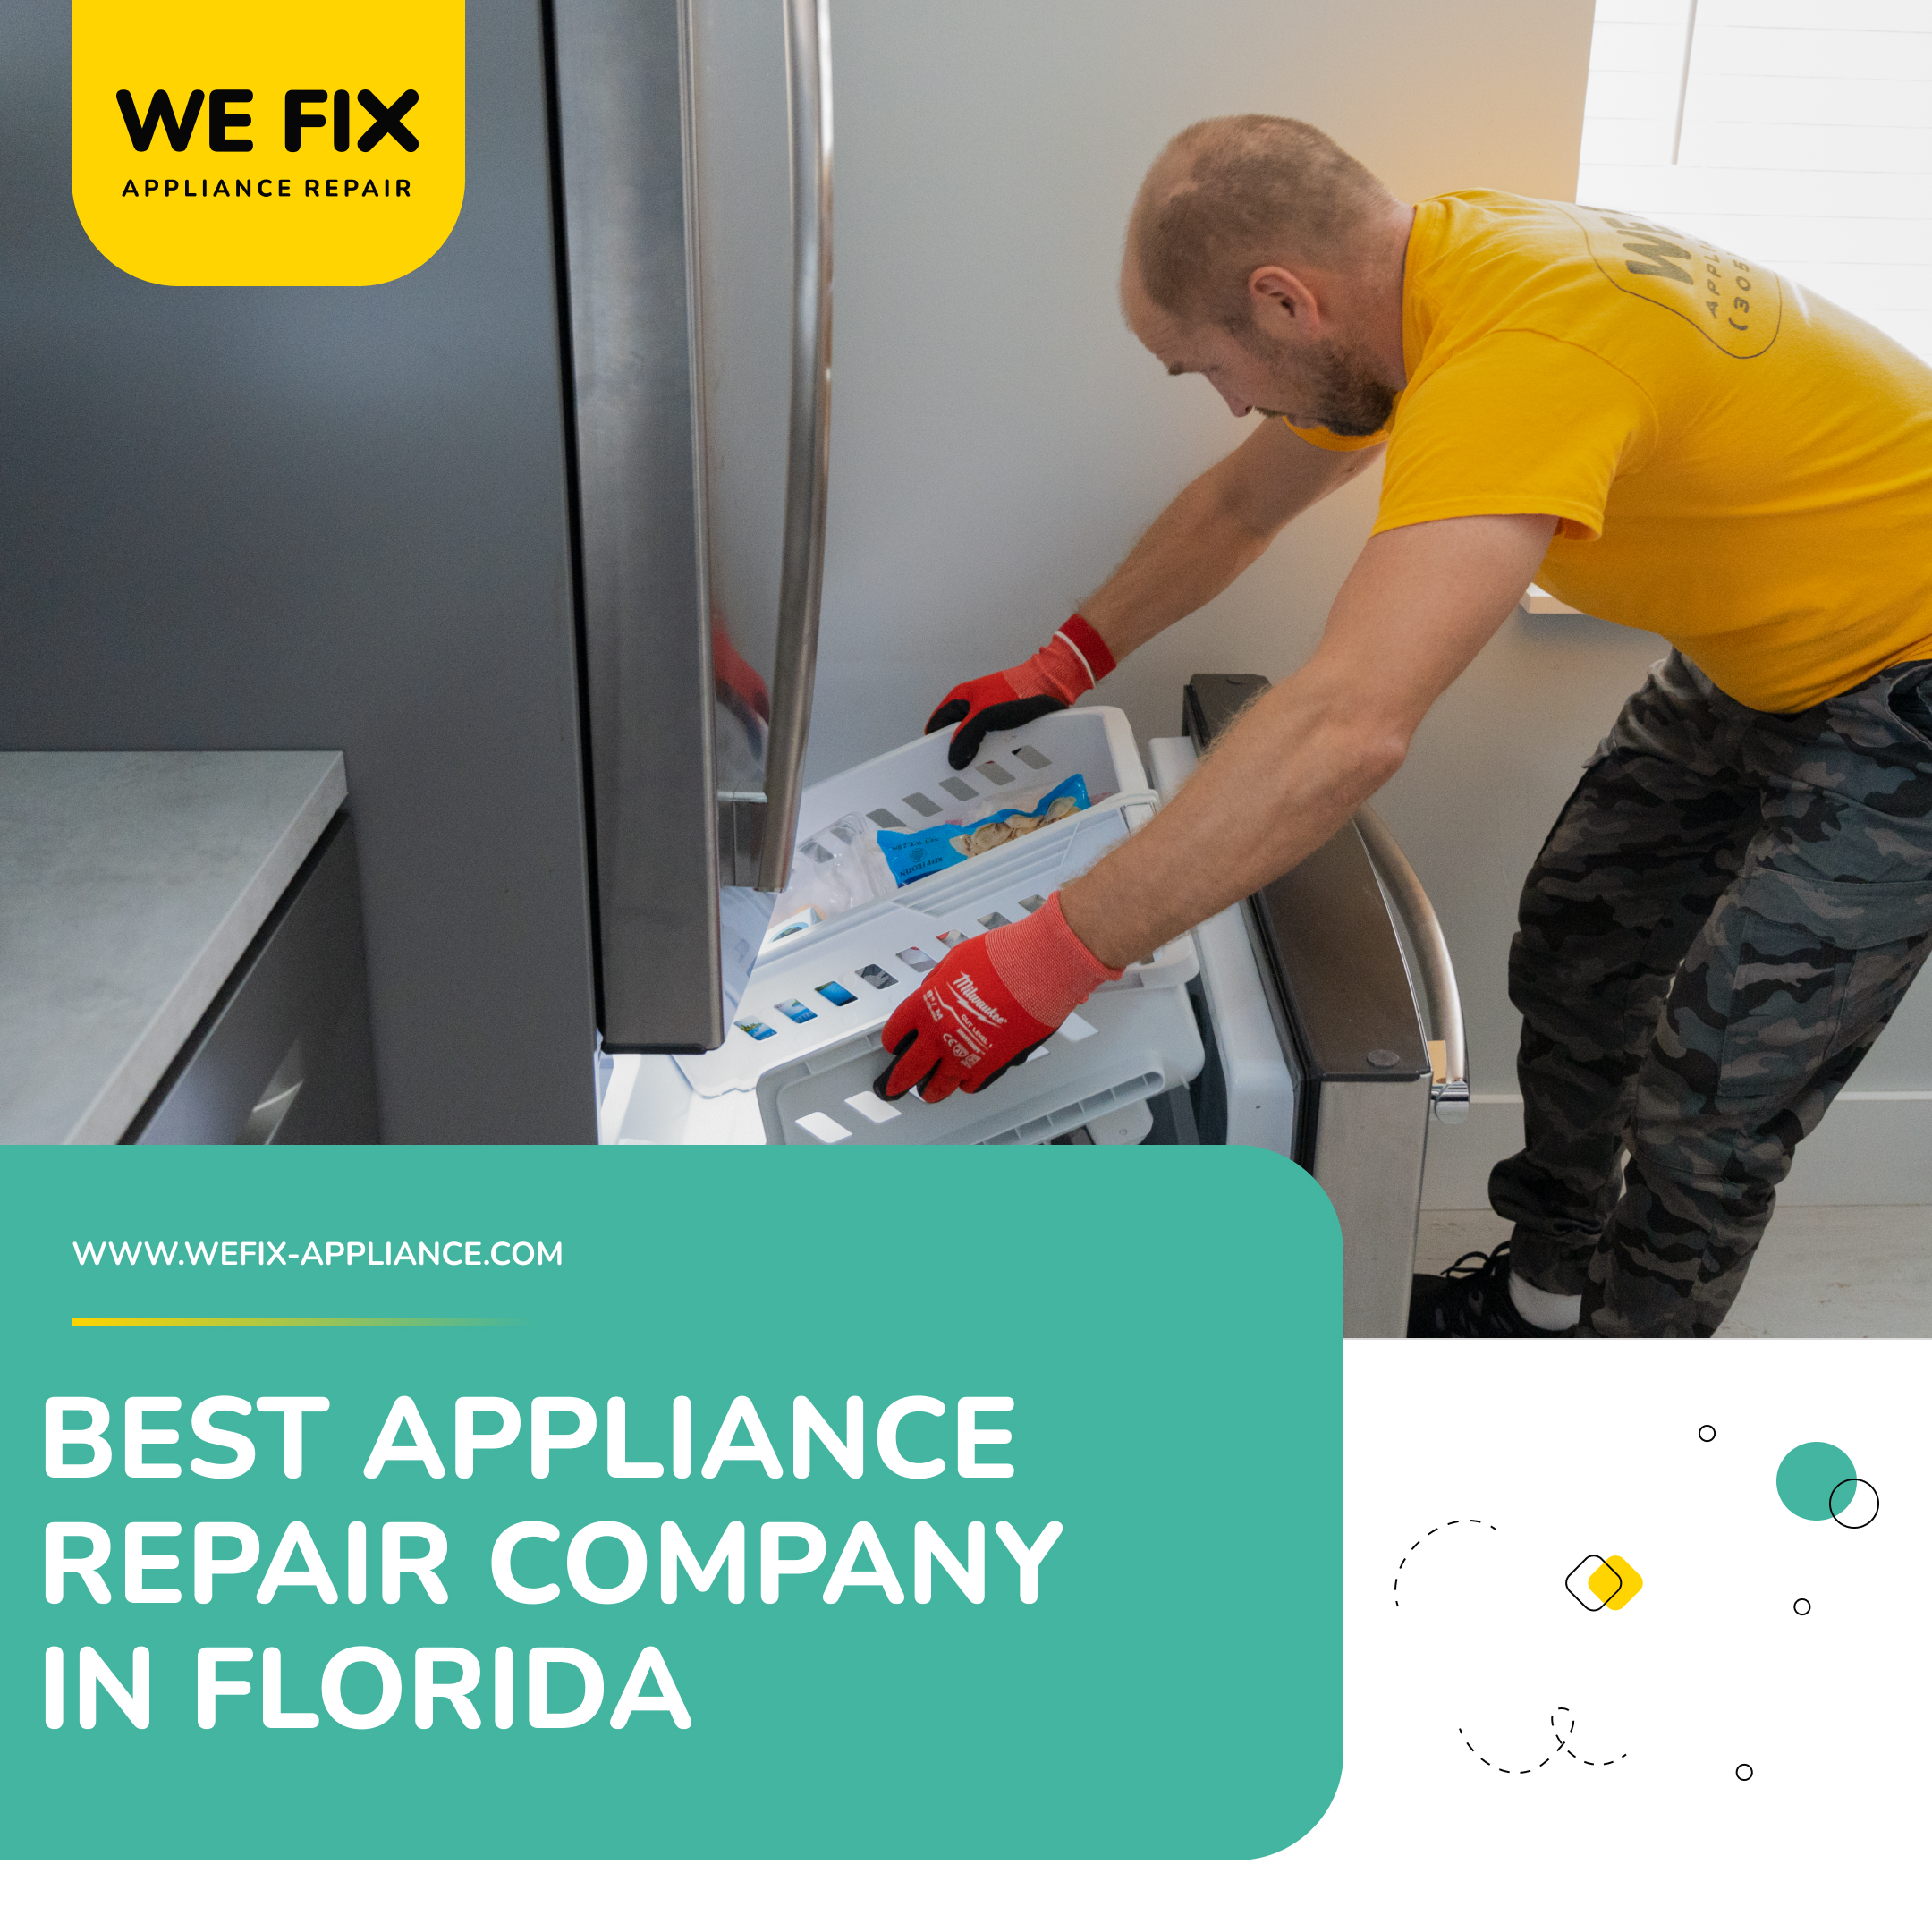 Best Appliance Repair Company in Florida